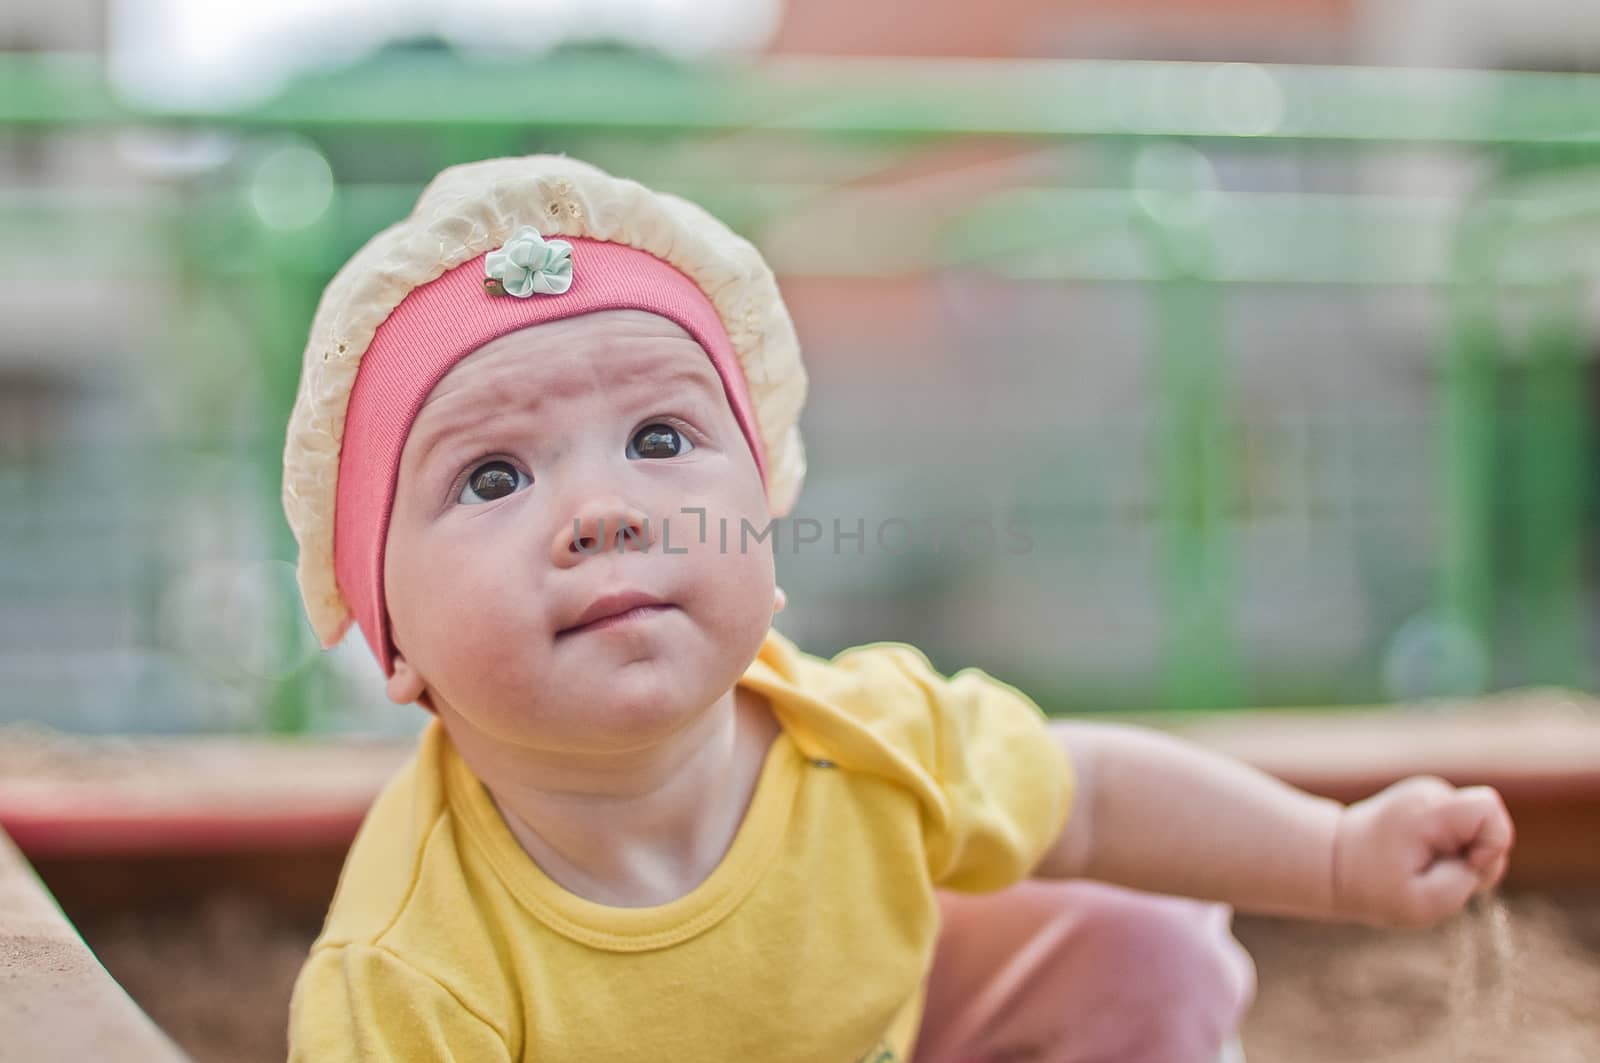 the Little smiling baby in hat horizontal  portrait